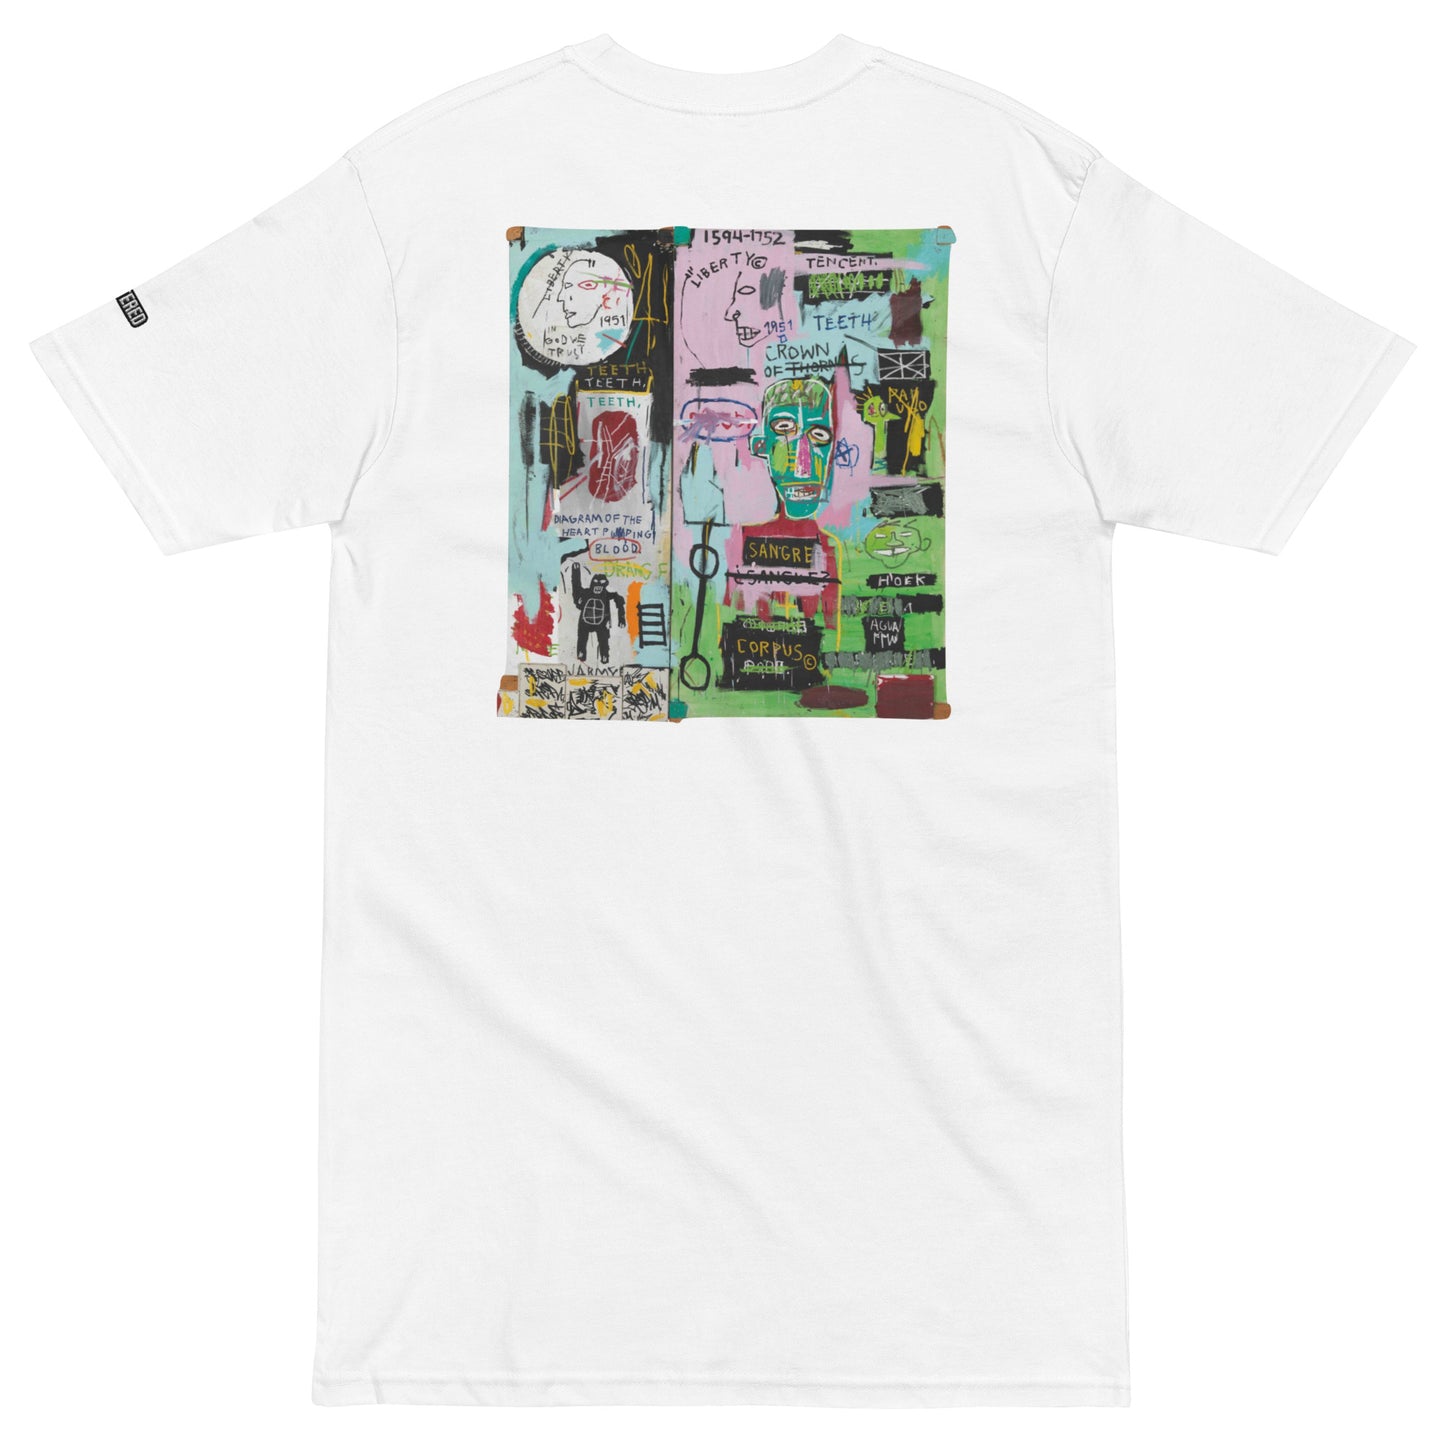 Jean-Michel Basquiat "In Italian" Artwork Embroidered and Printed Premium White Streetwear T-Shirt Scattered